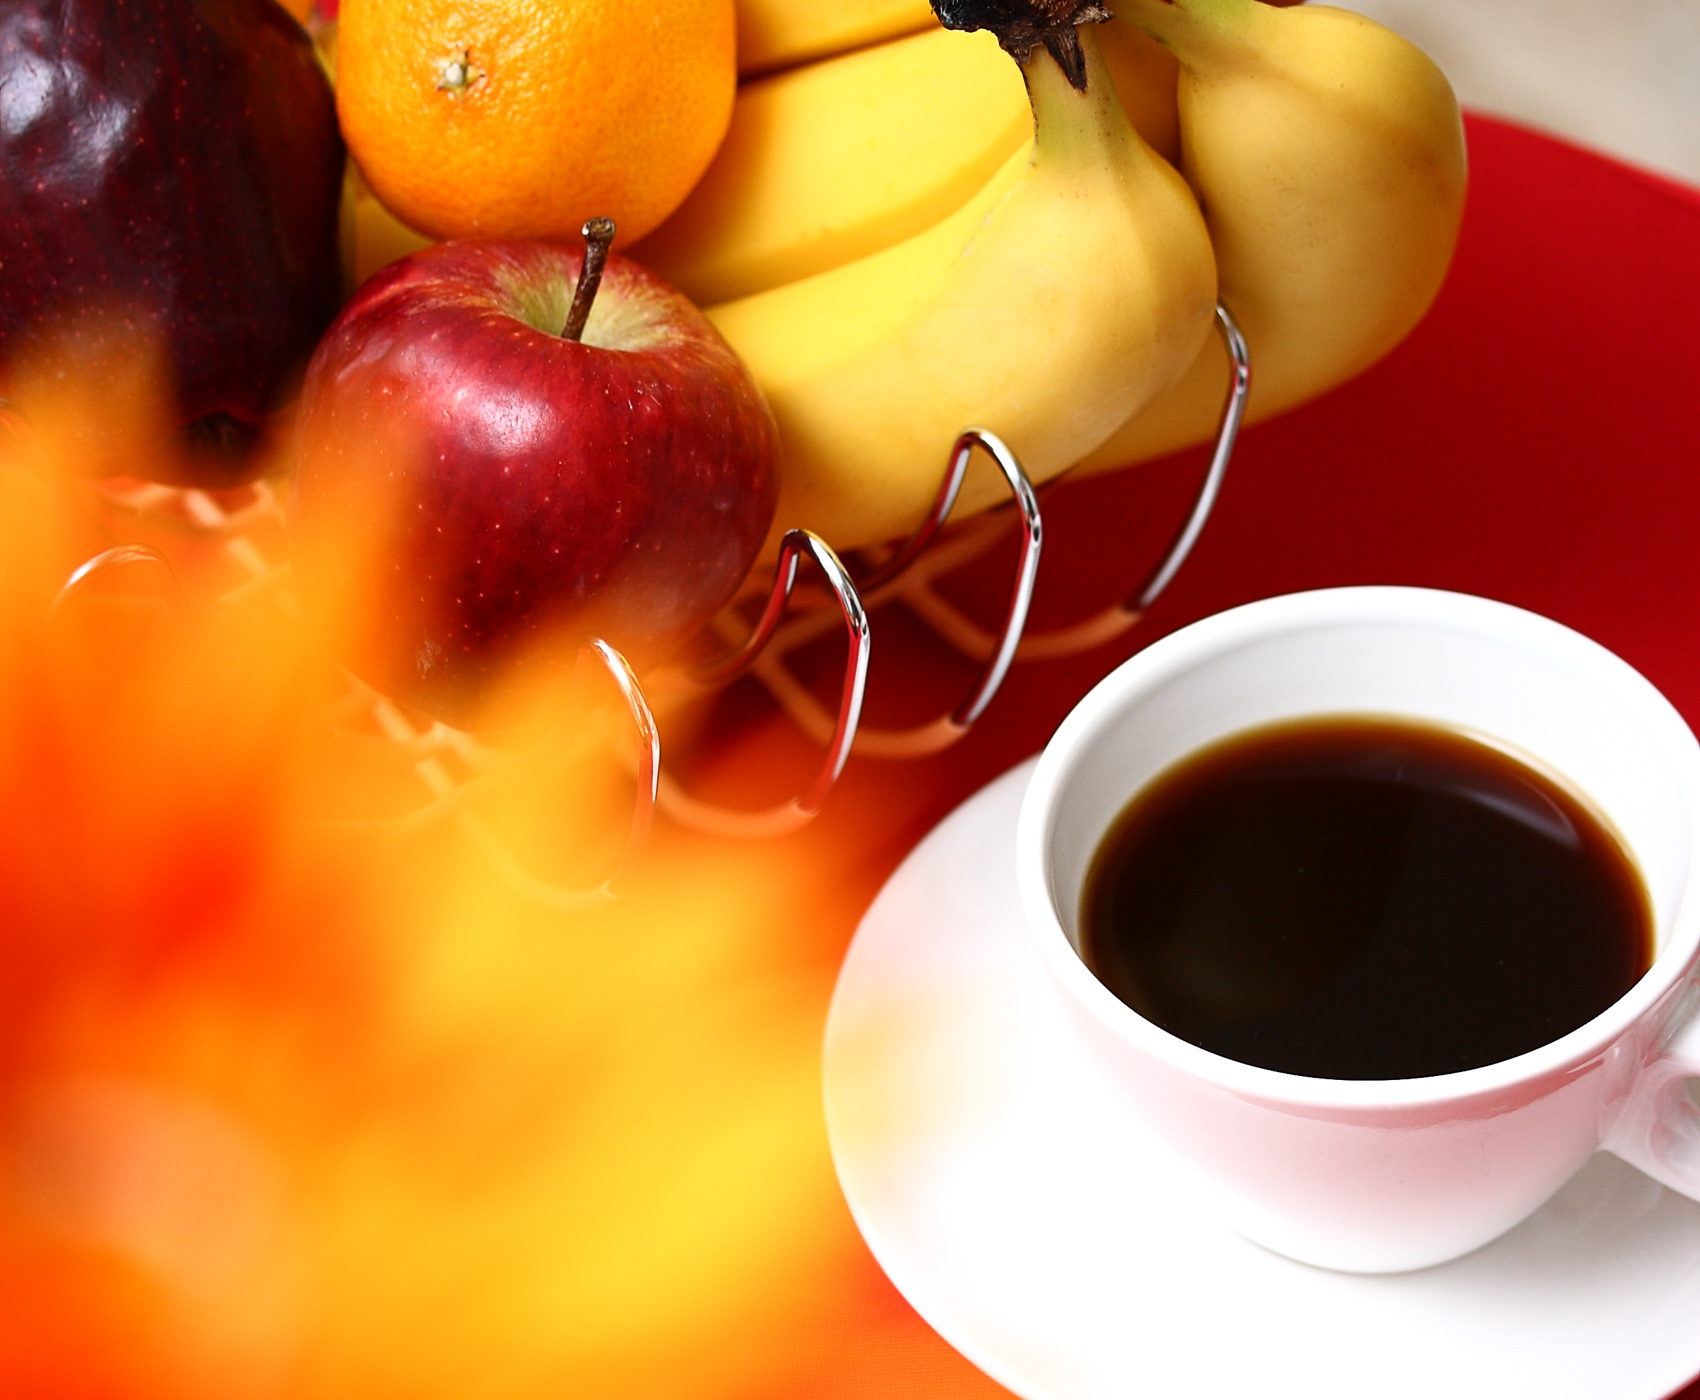 Healthy Fruit With Coffee For Breakfast, Apple, Freshness, Tasty, Snacks, HQ Photo